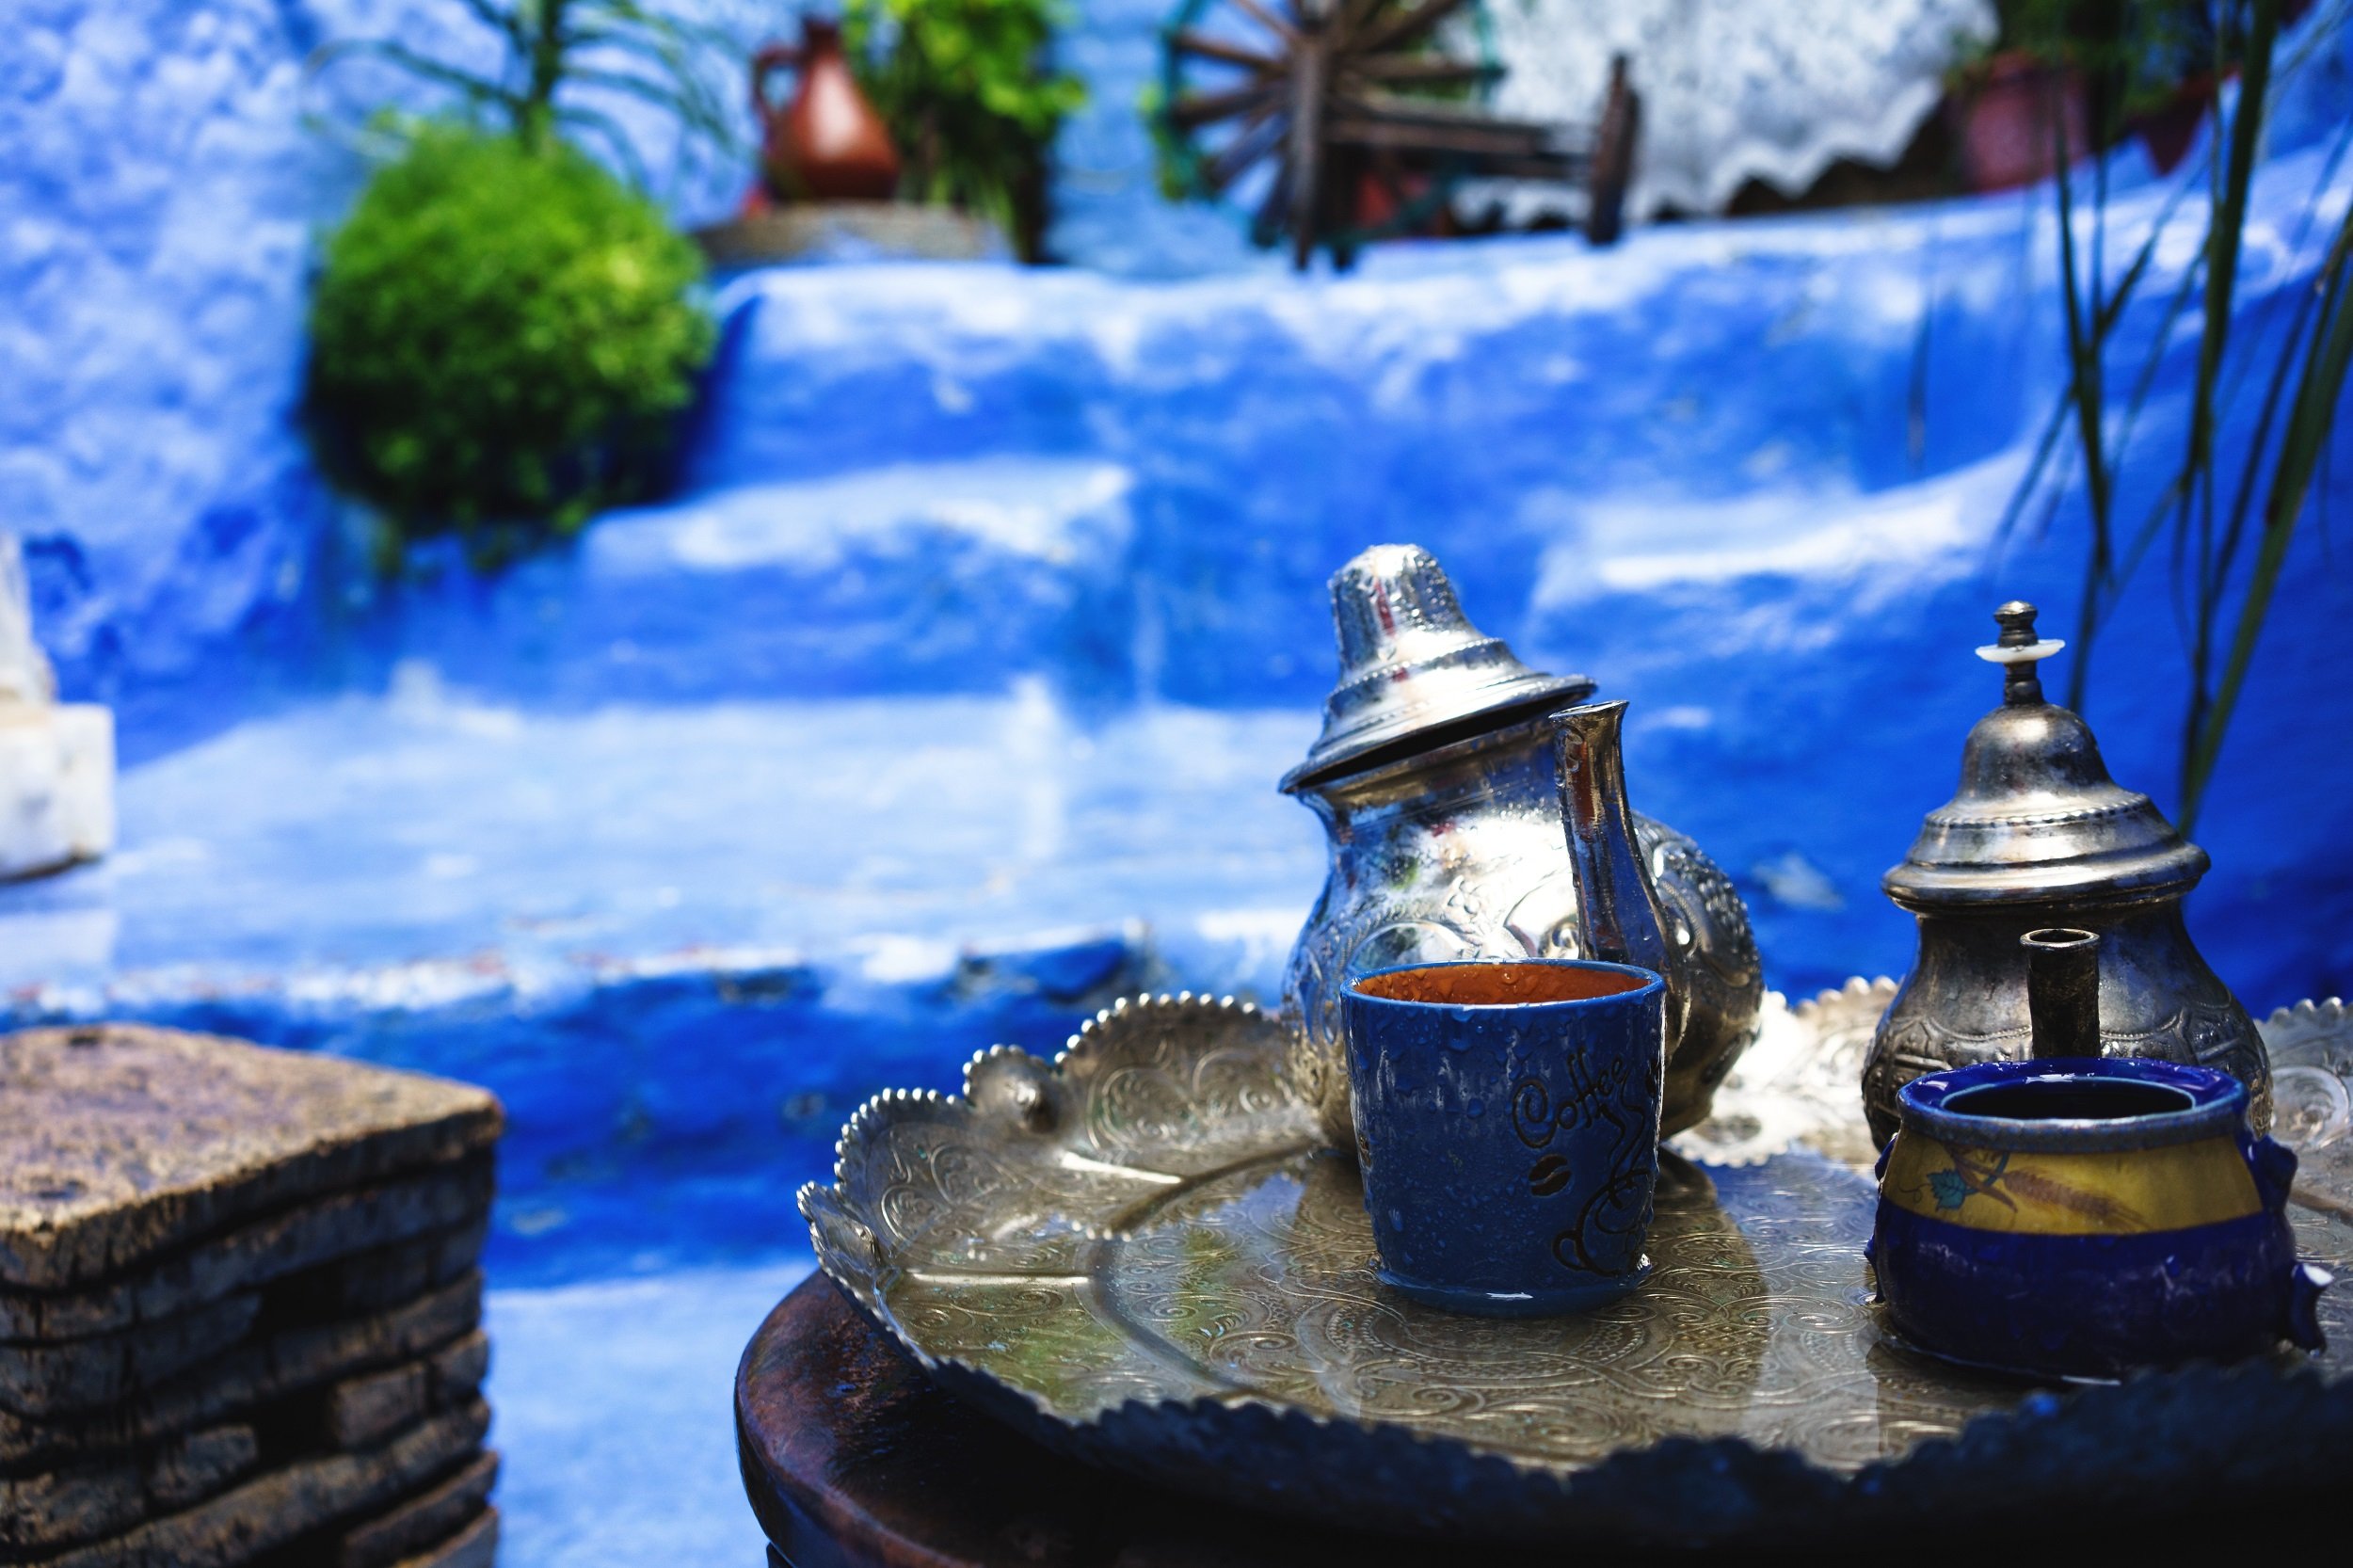 Moroccan Food Tour In Chefchaouen